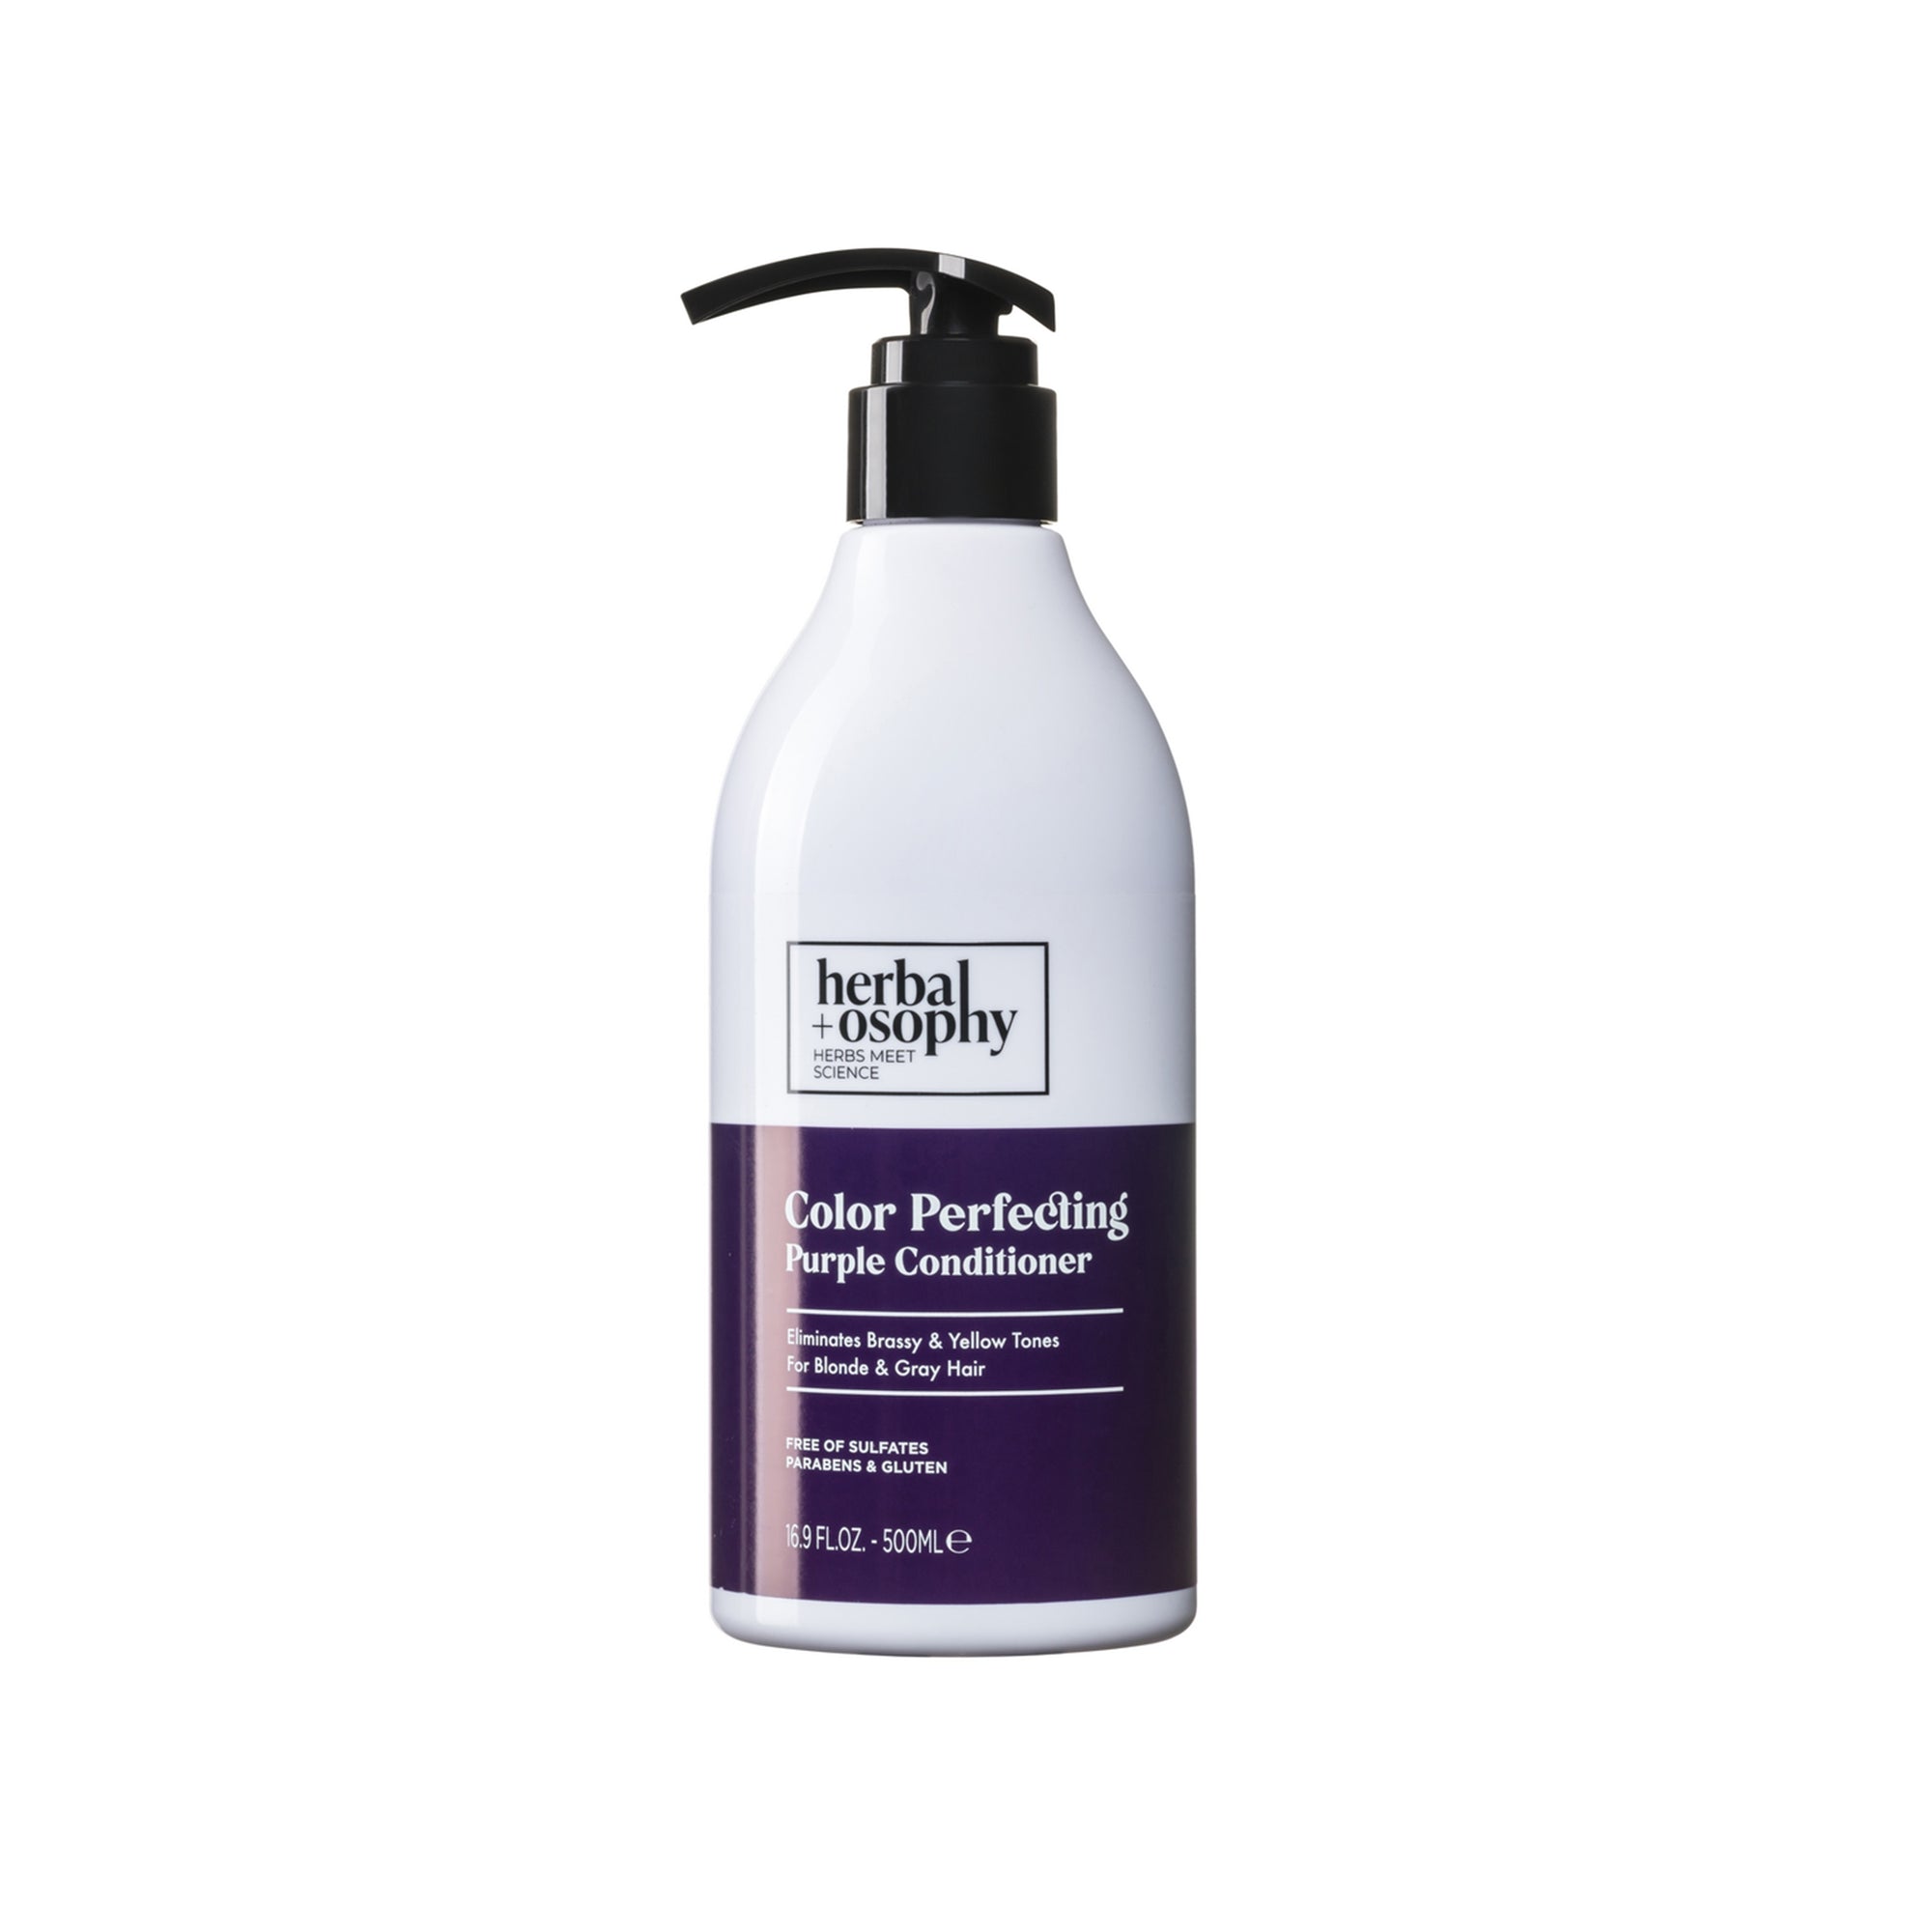 Herbalosophy Color Perfecting Purple Conditioner bottle front